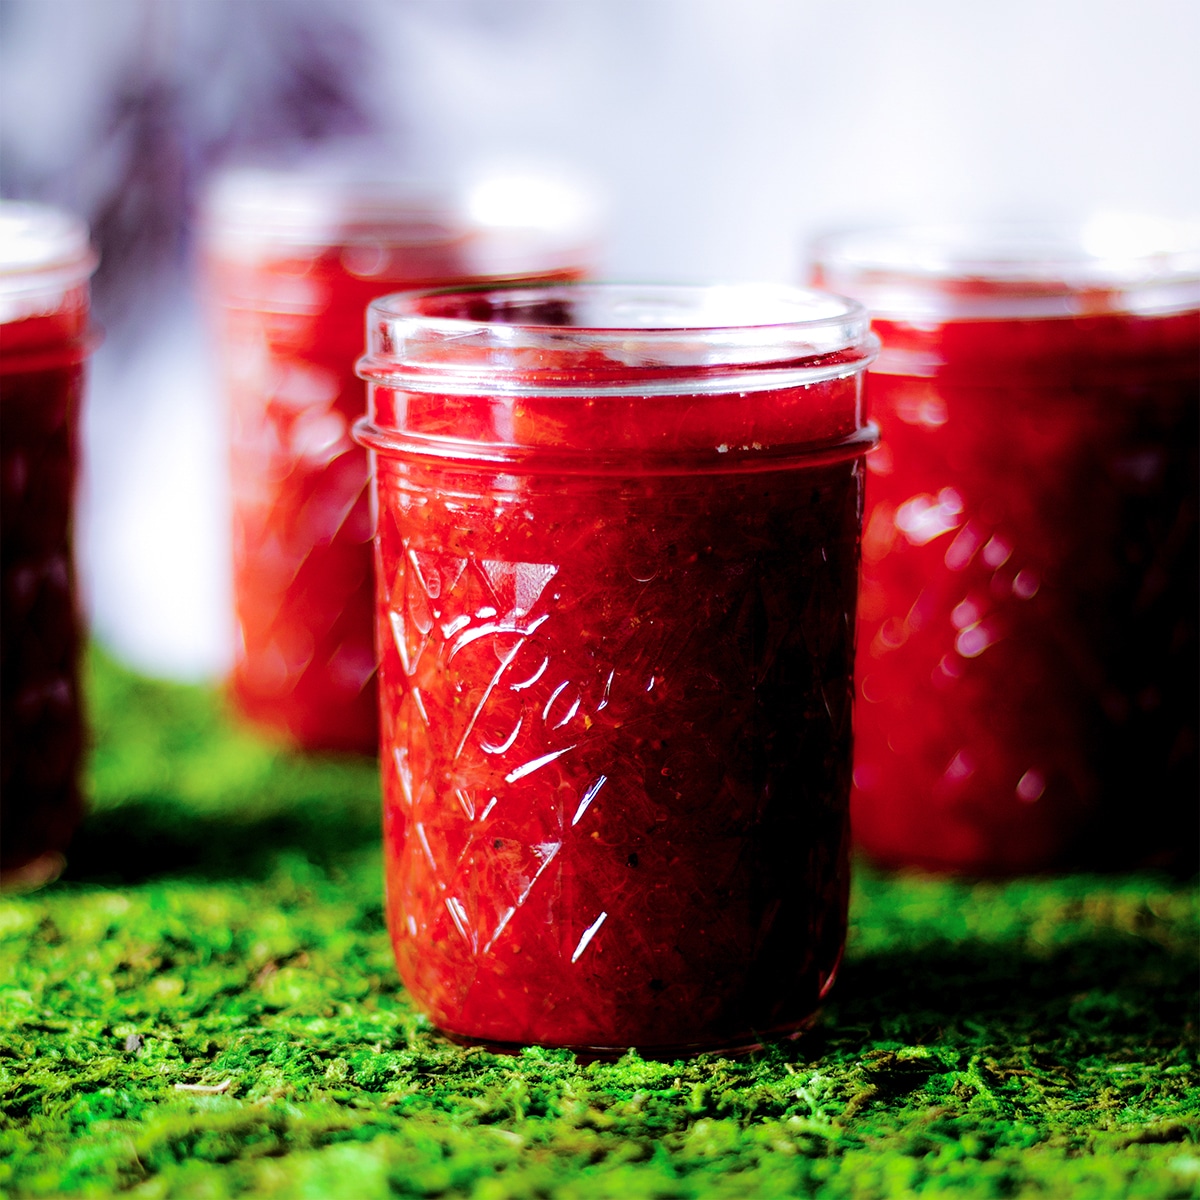 Jars of strawberry rhubarb jam sitting on a table covered with bright green artificial grass.